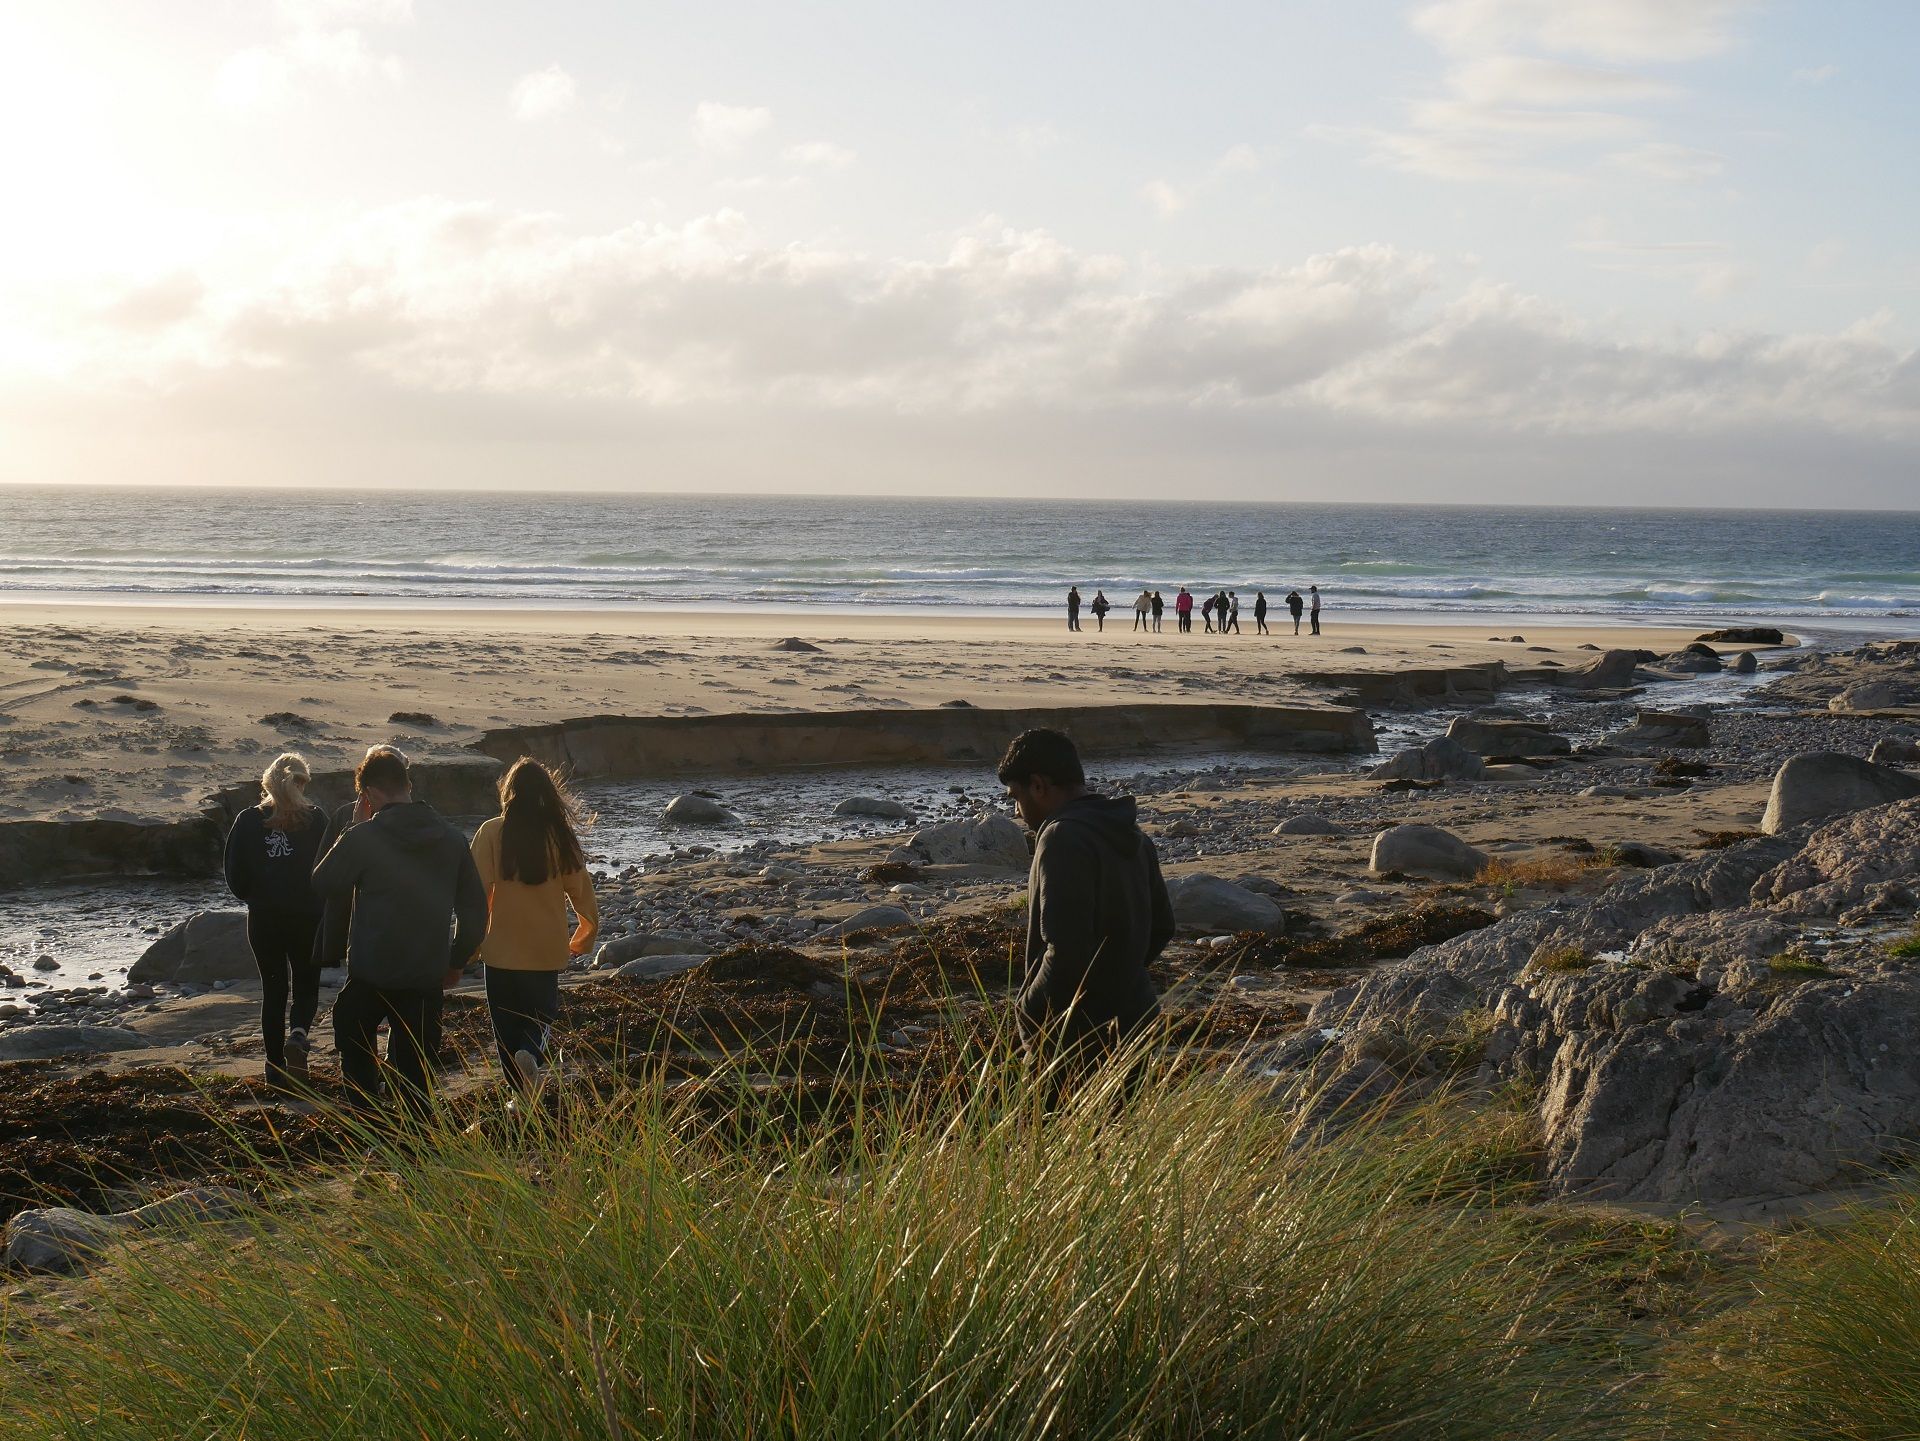 students walking on a remote deserted beach